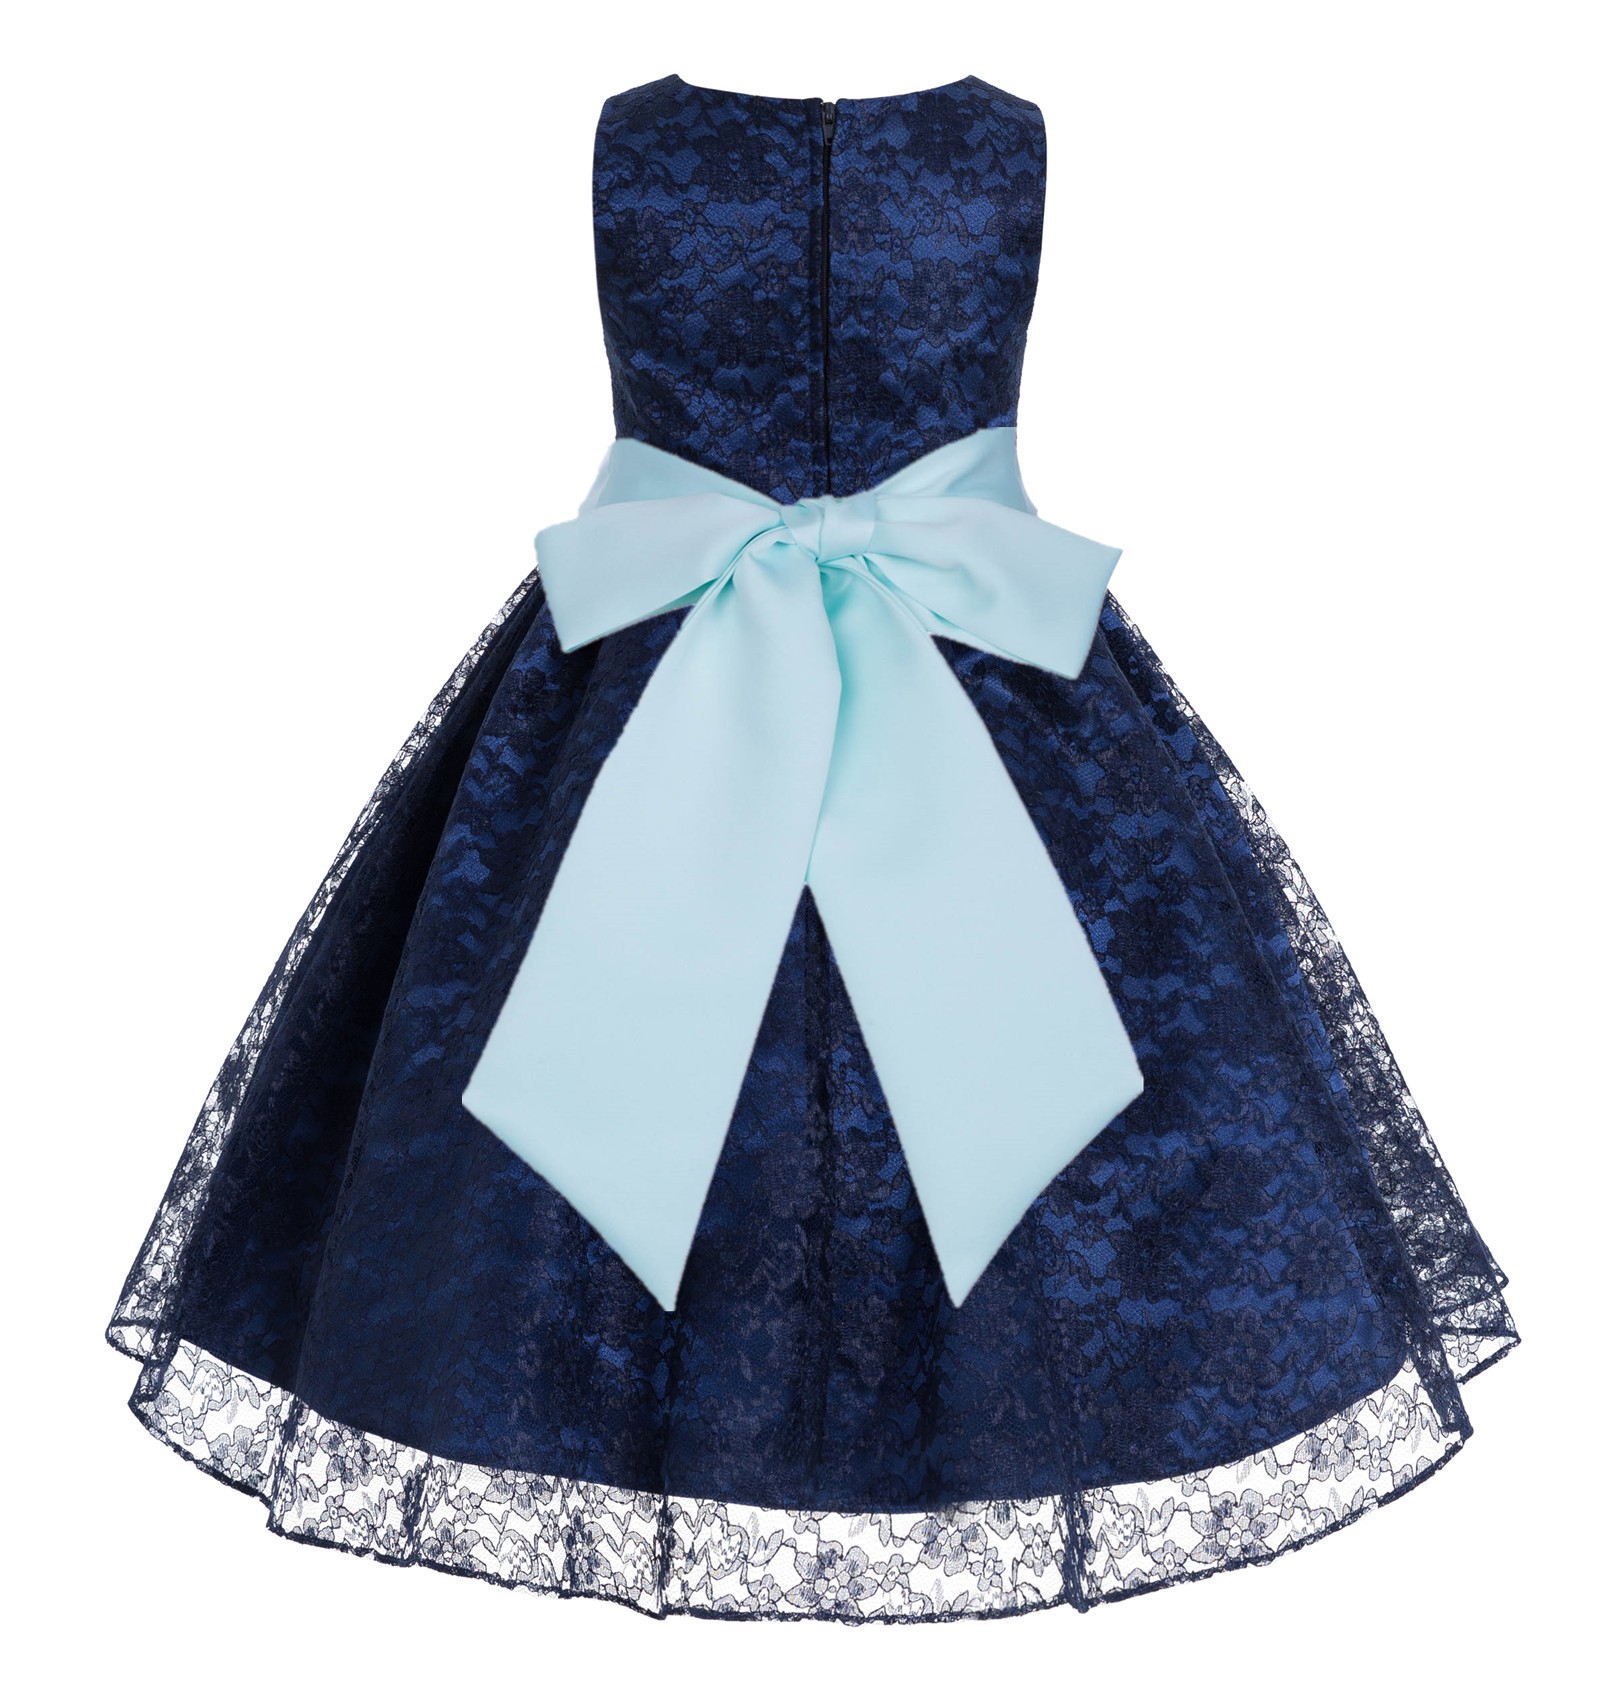 Navy / Mint Floral Lace Overlay Flower Girl Dress Lace Dresses 163s